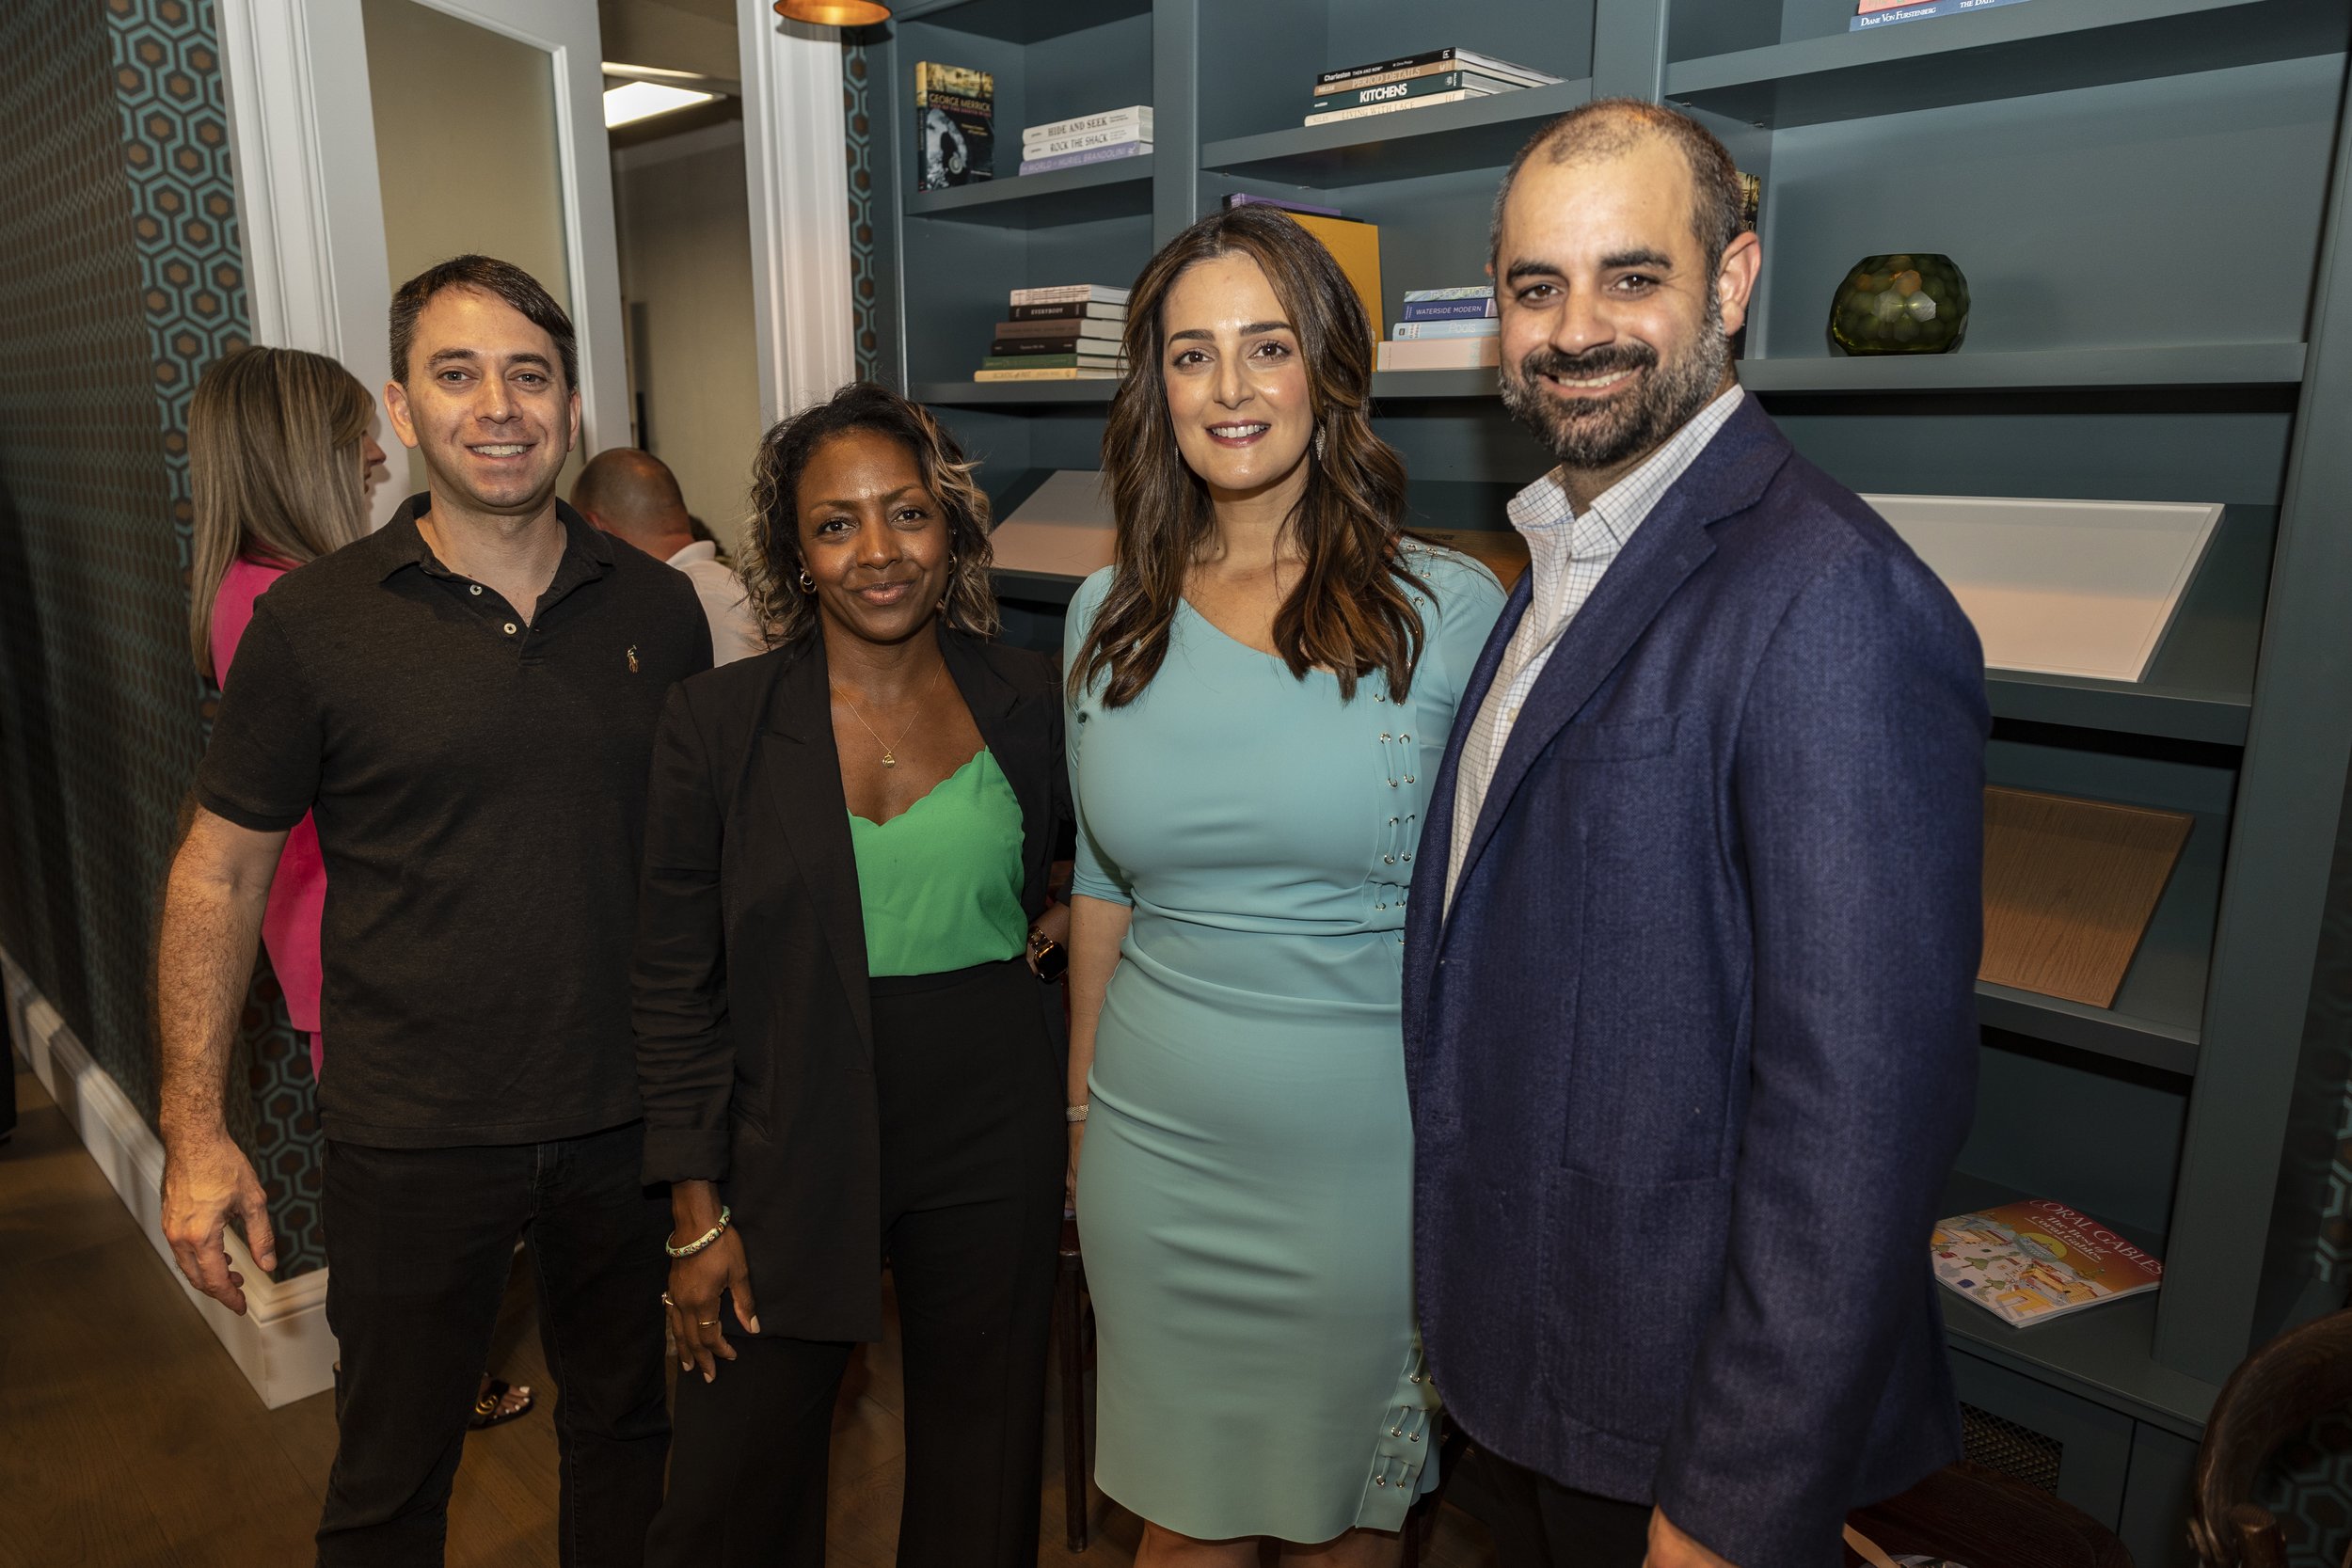 Inside 'An Exploration Into Capital Markets Coral Gables' Presented By PROFILEmiami & MG Developer28.JPG